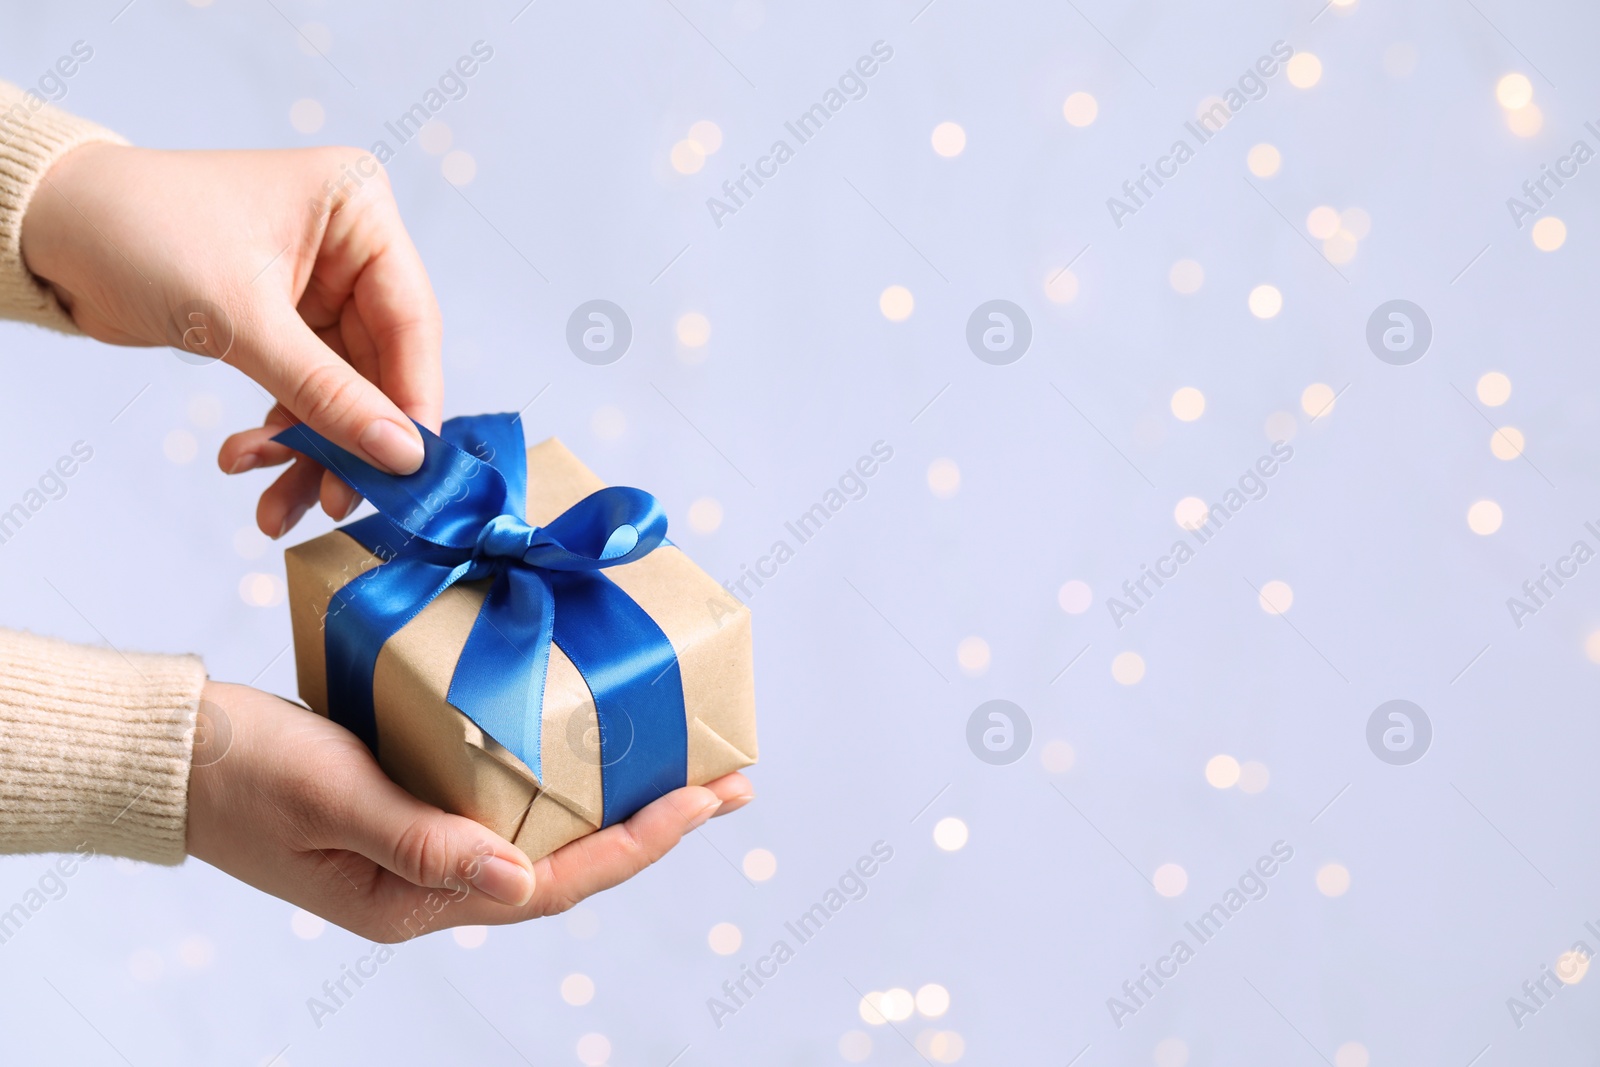 Photo of Woman holding gift box with blue bow against blurred festive lights, closeup and space for text. Bokeh effect